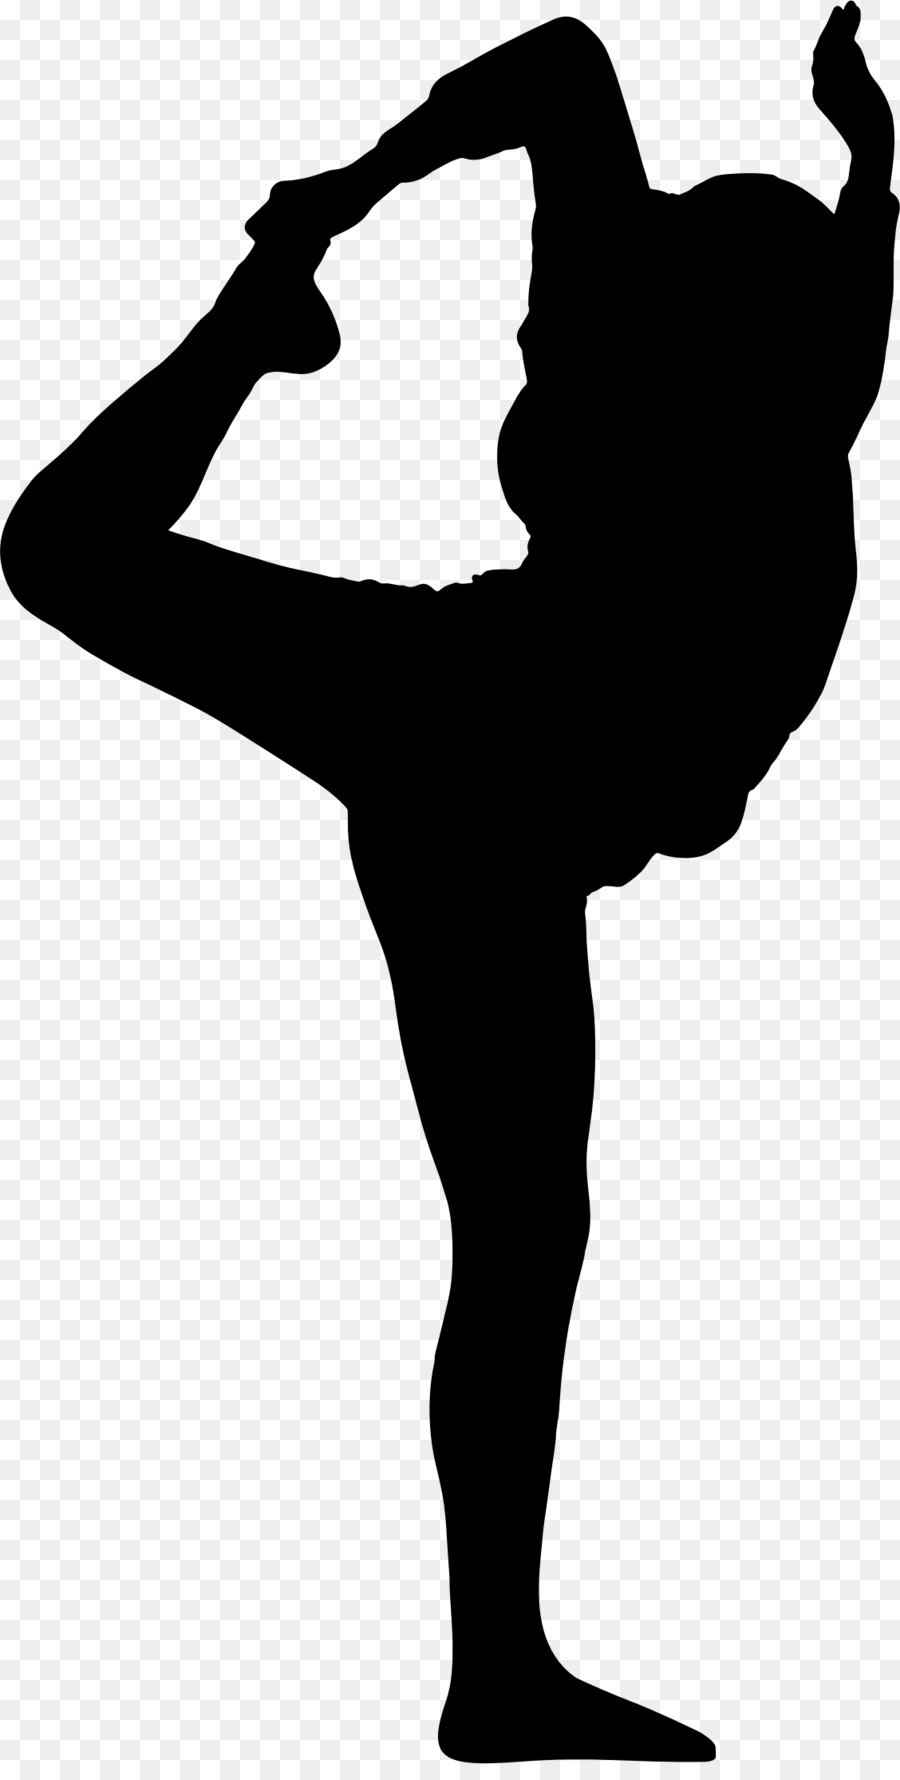 Stretching Yoga Silhouette Physical exercise - Silhouette png download - 1128*2211 - Free Transparent Stretching png Download.